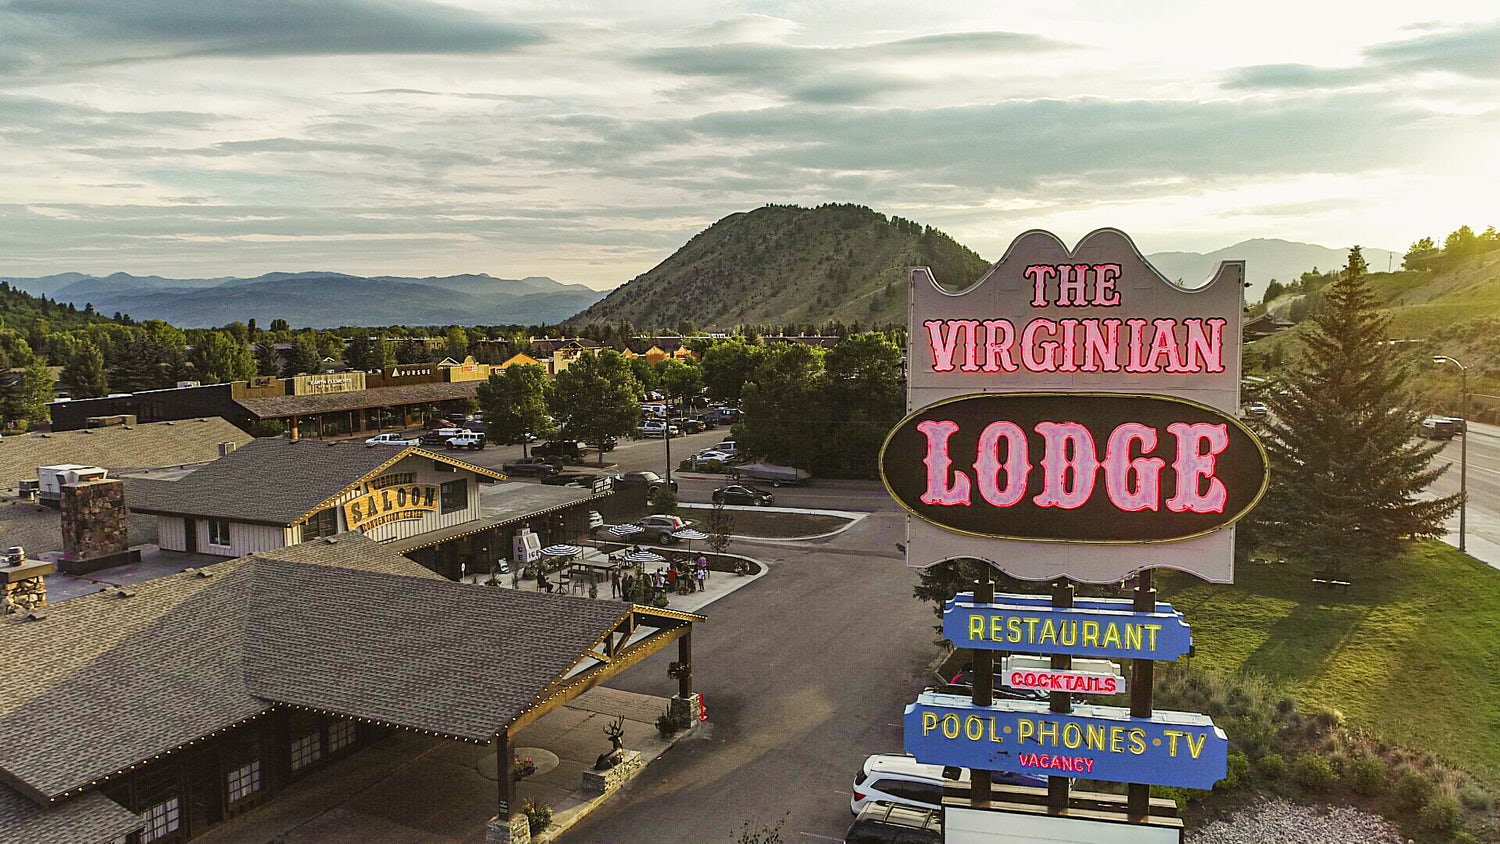 Drone captures stunning "The Virginian Lodge" exterior, featuring lush greenery mountains in the background.